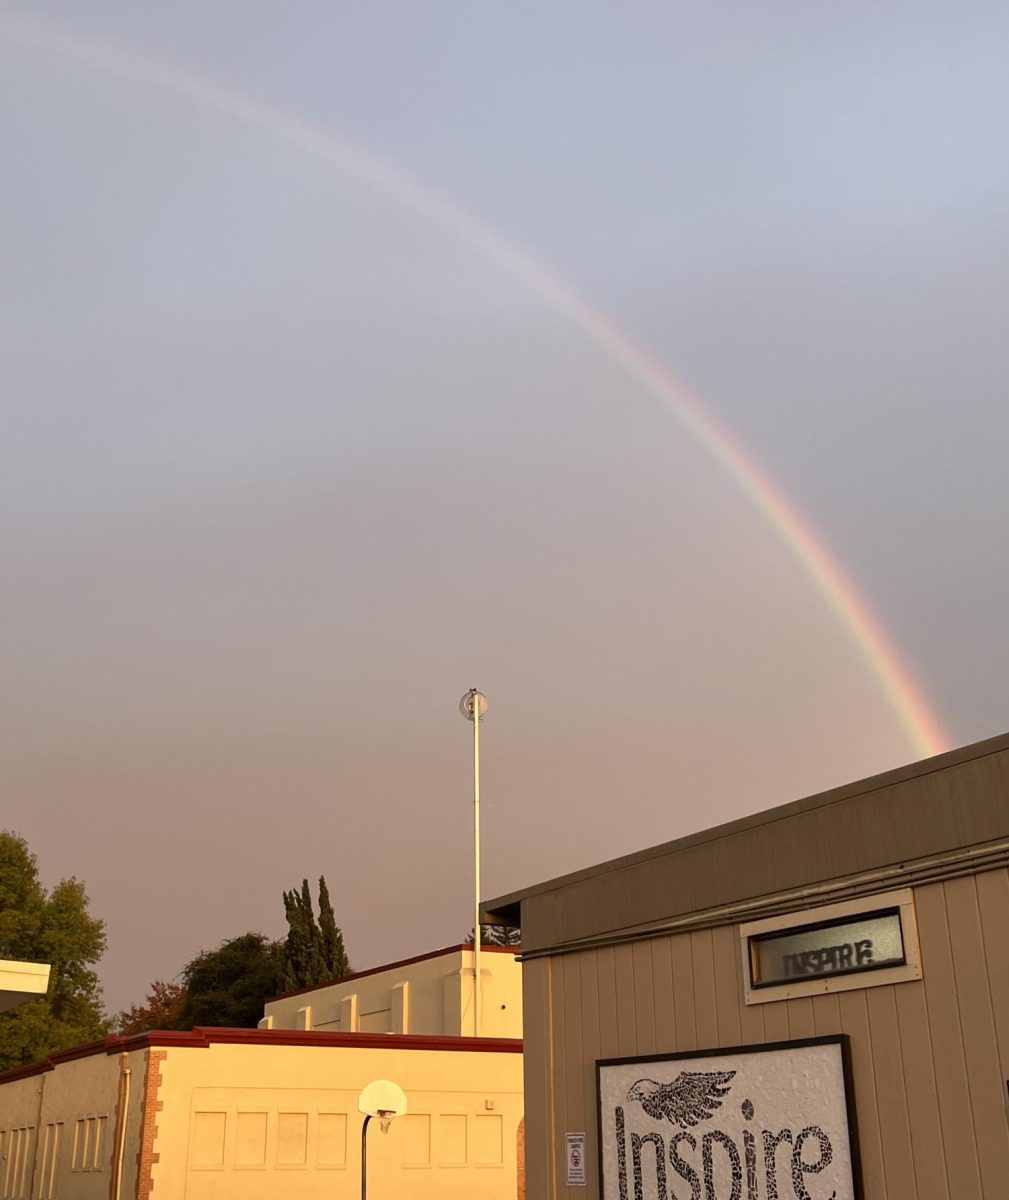 A rainbow shines over the Inspire campus.